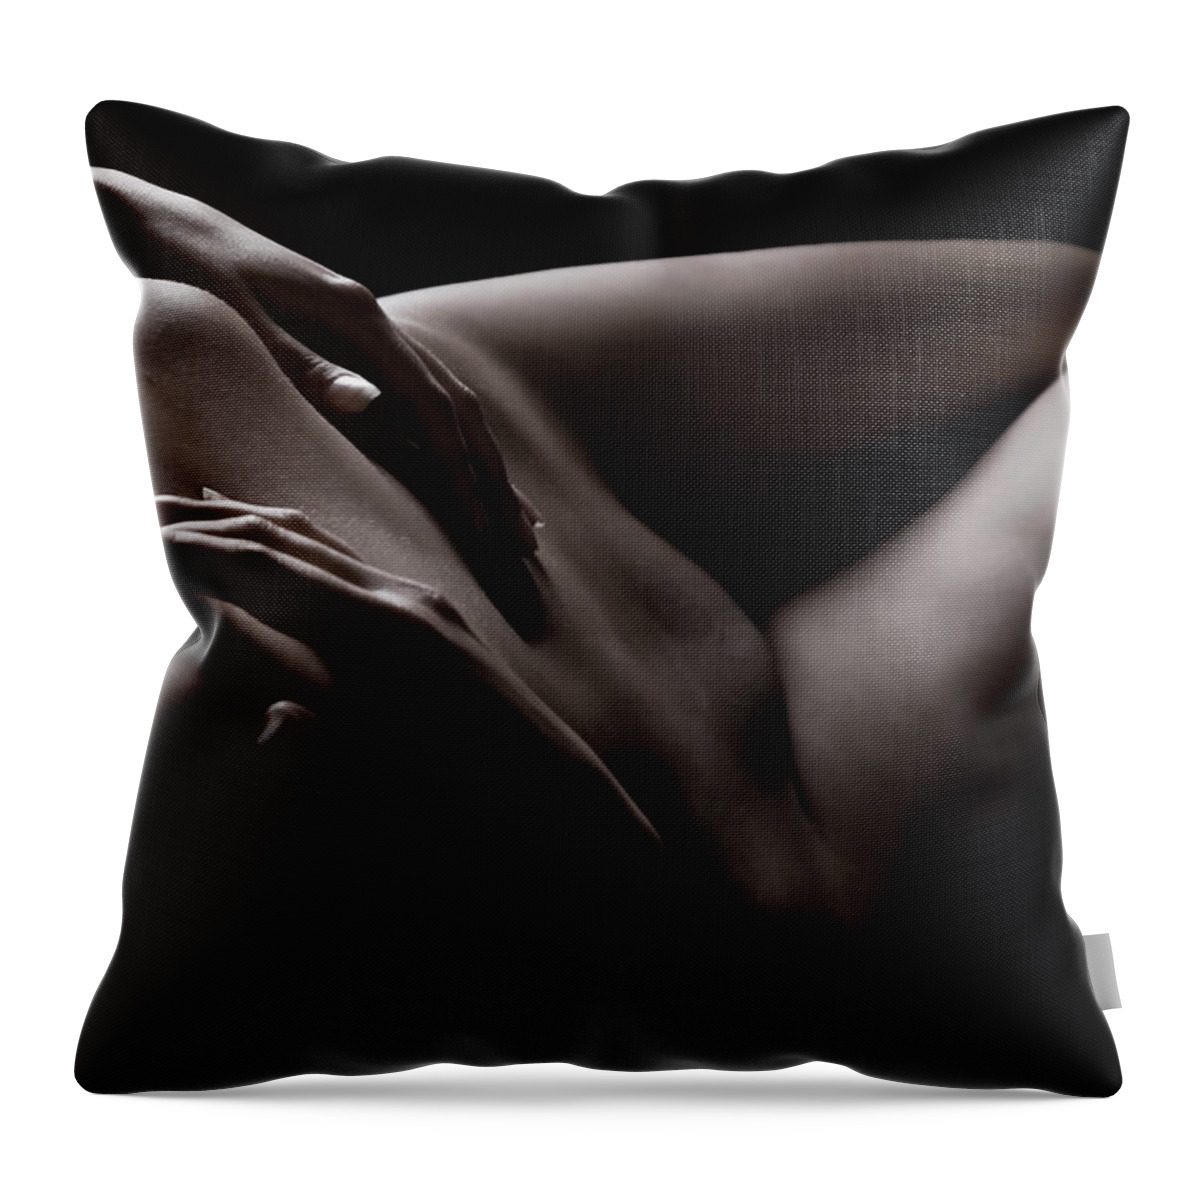 Nude Throw Pillow featuring the photograph Sweet Seduction by Vitaly Vakhrushev